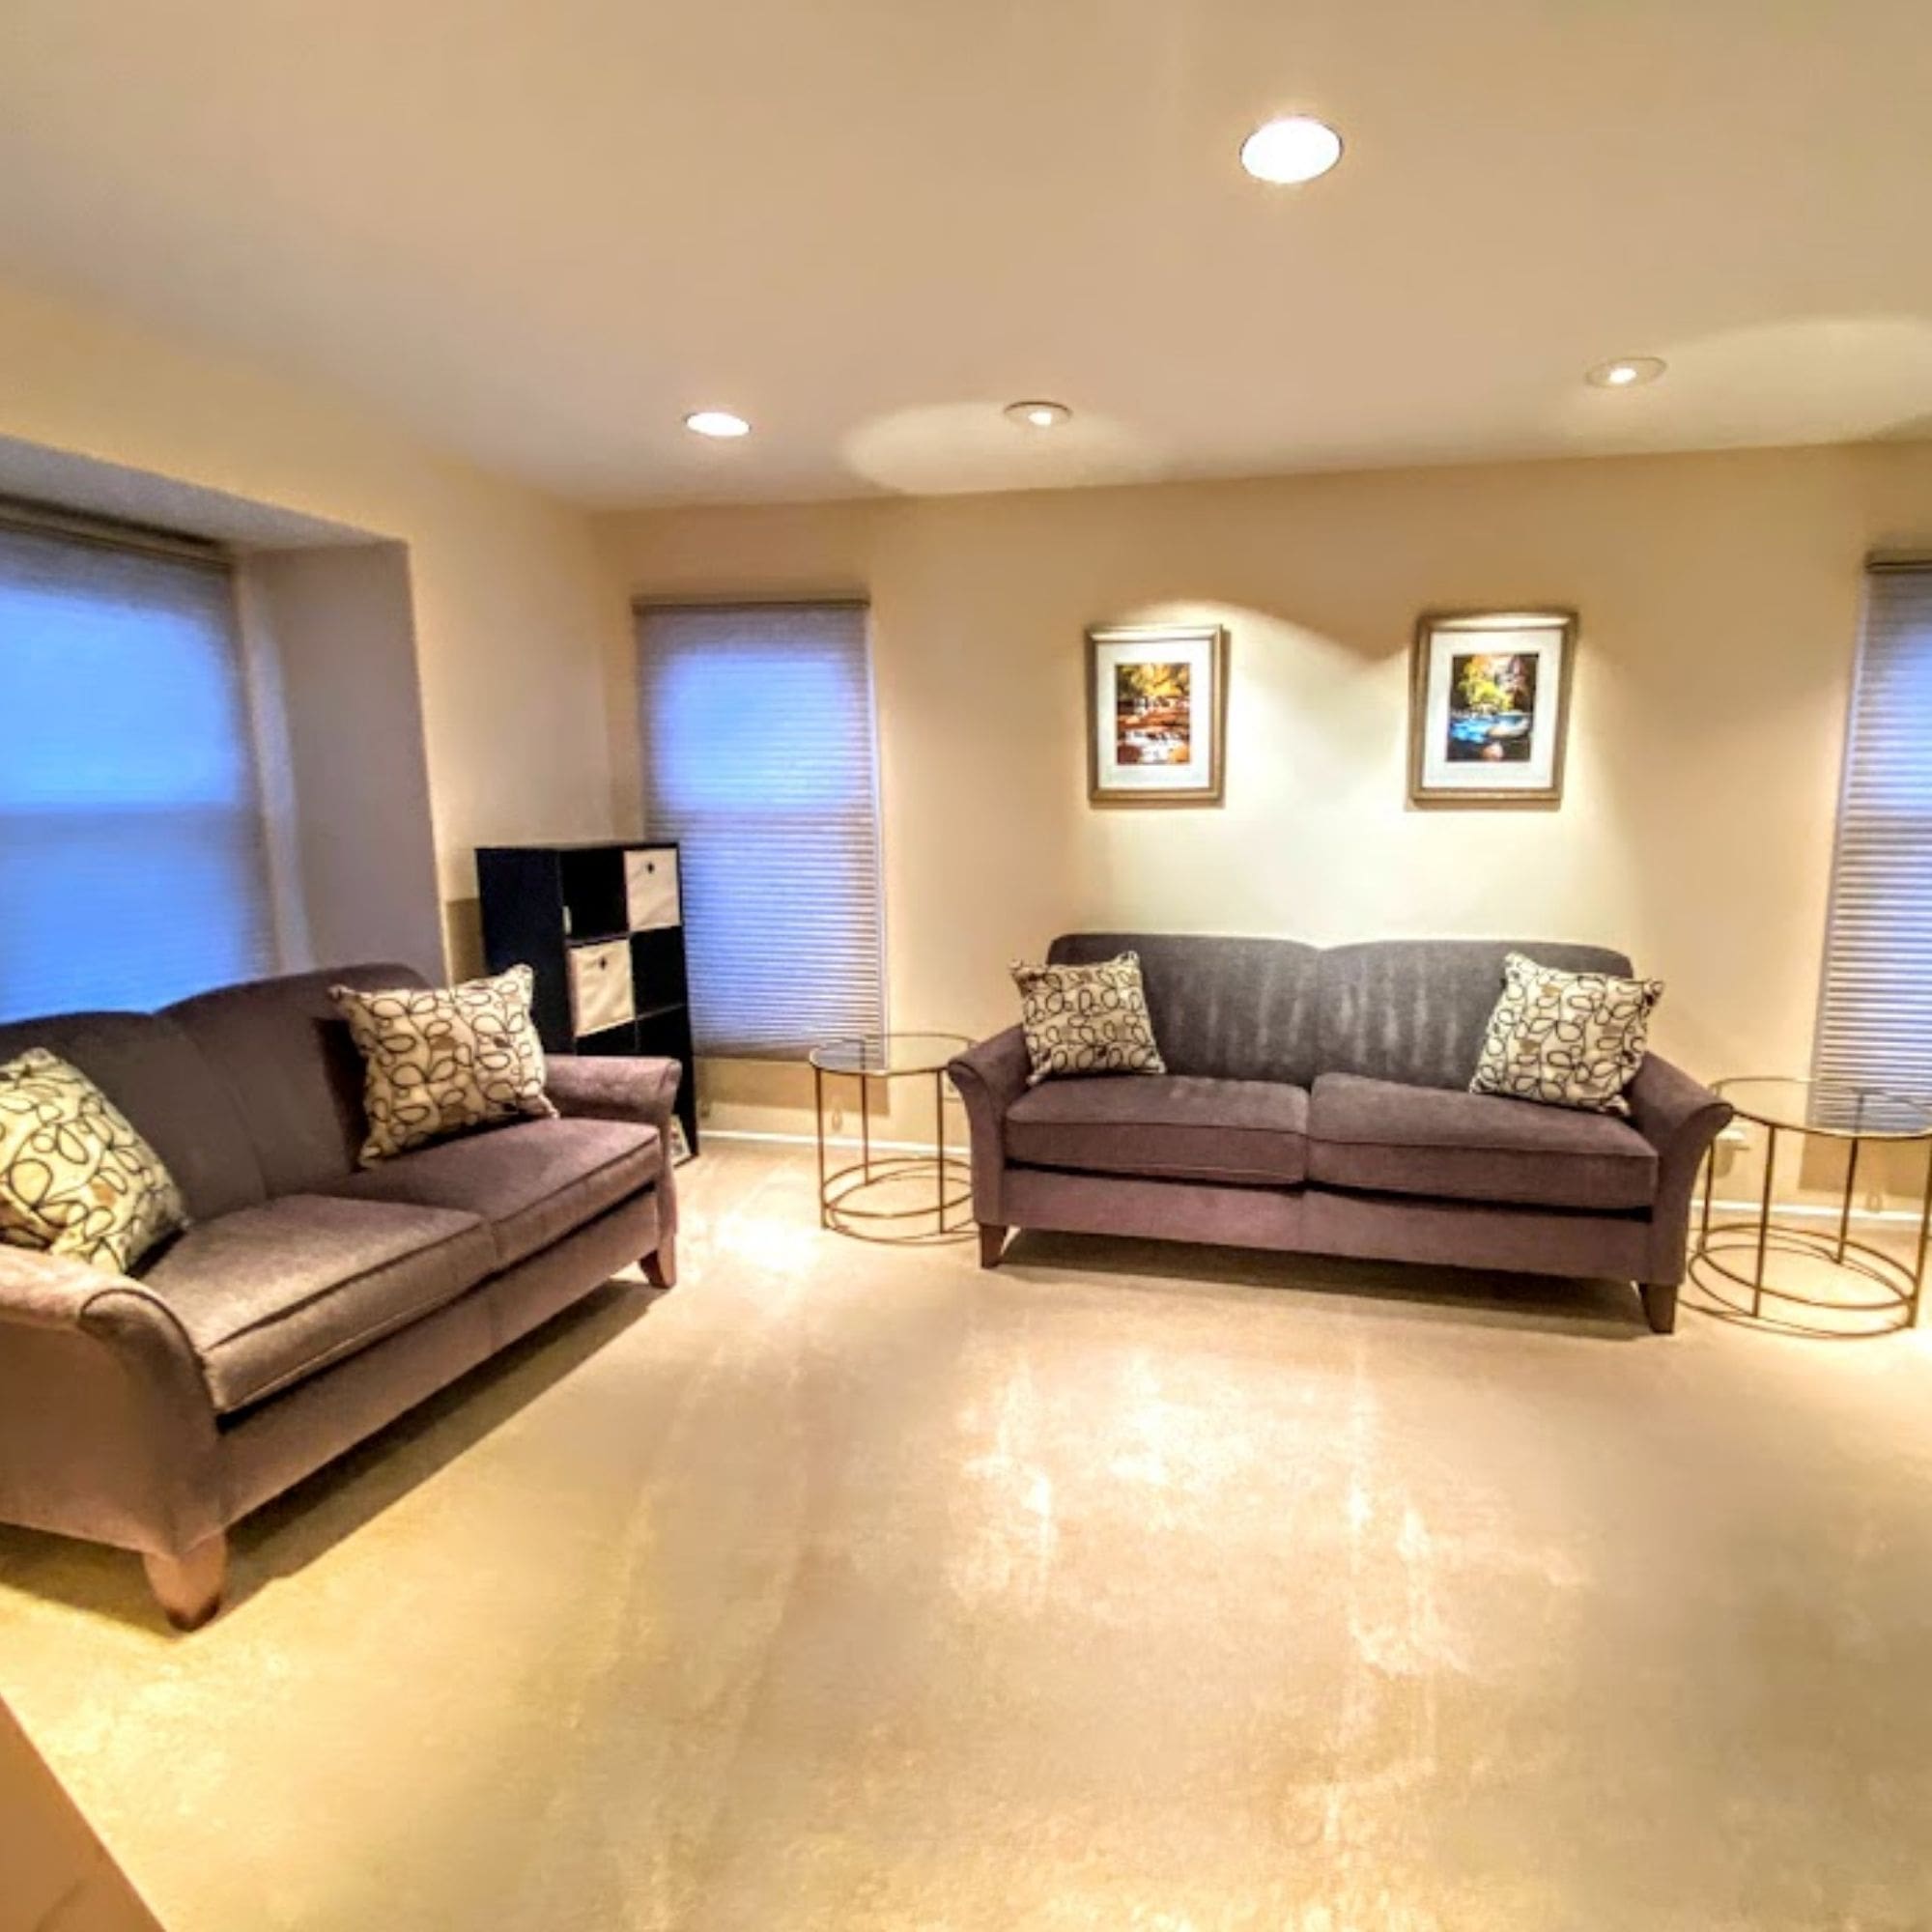 A room in use prior to being prepared for home staging